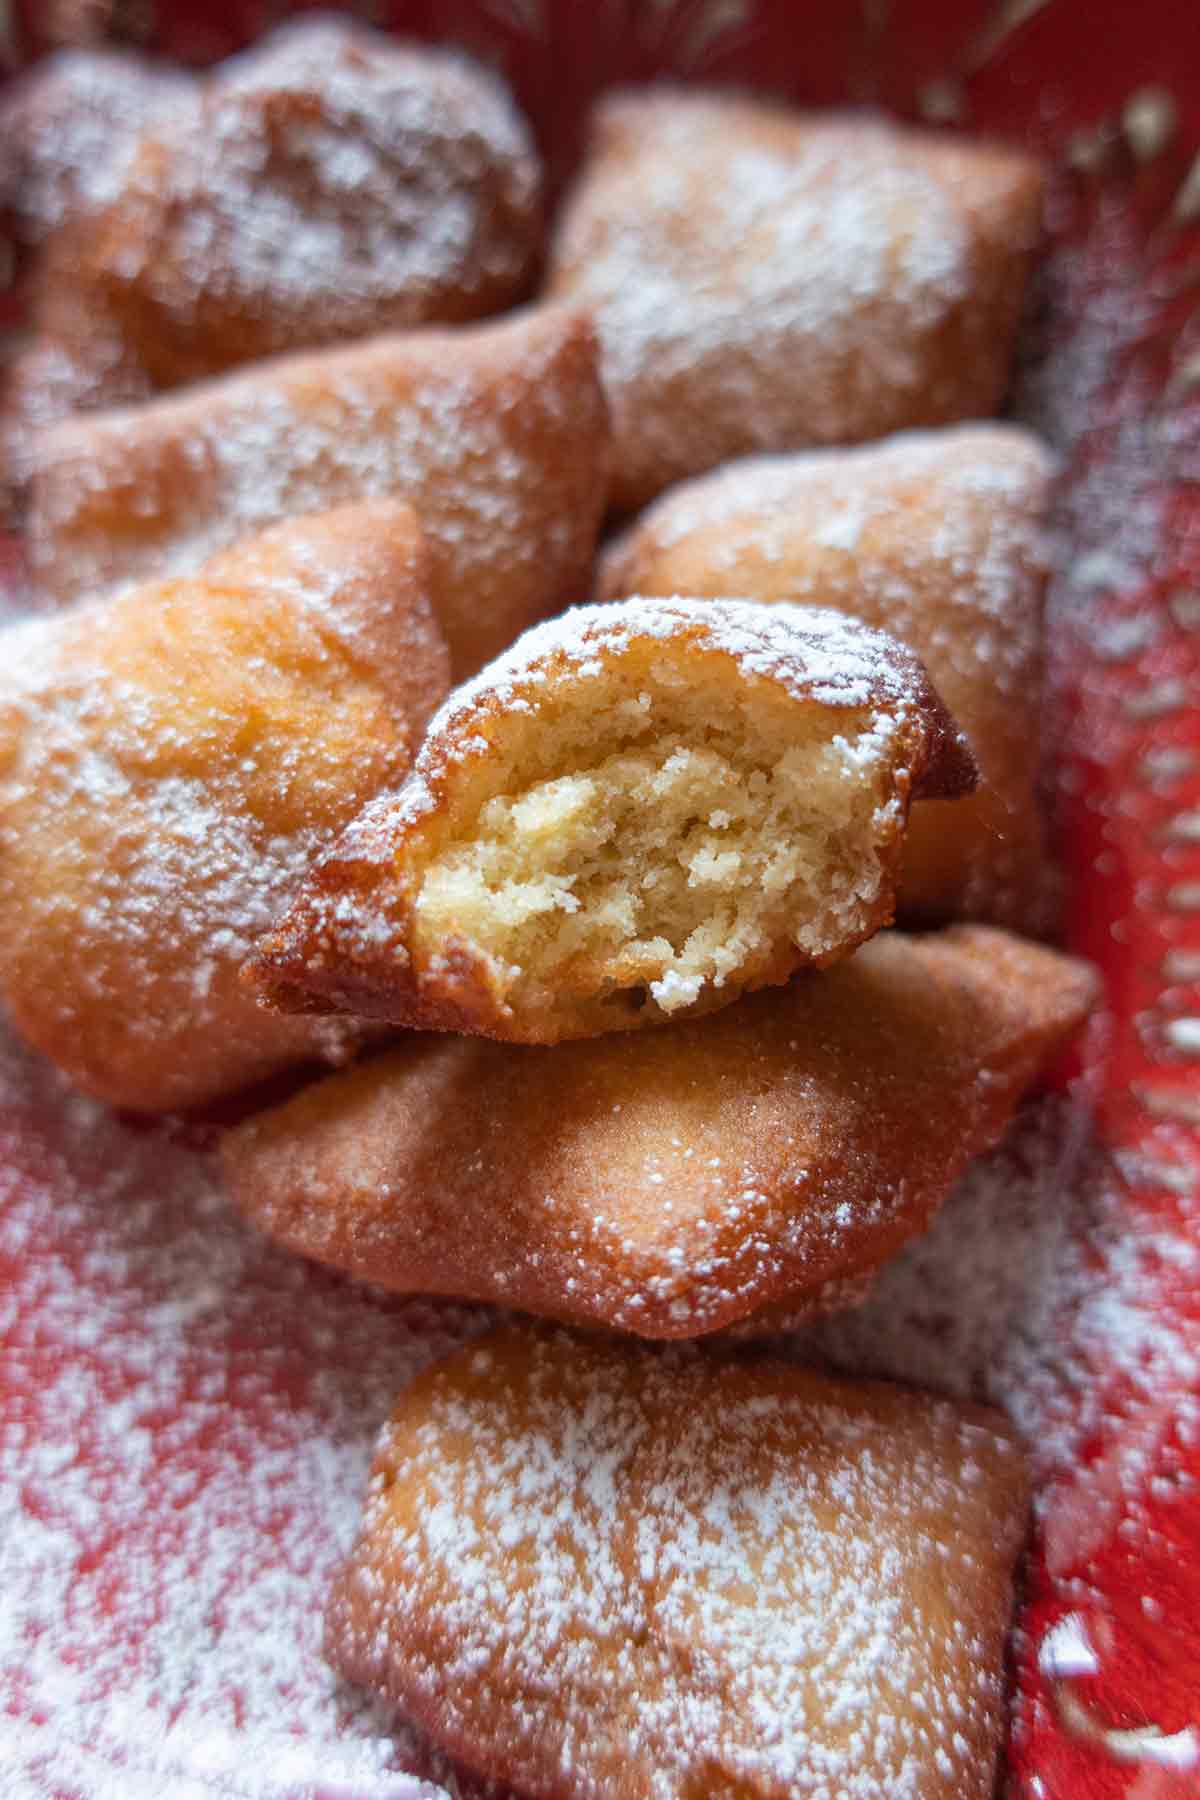 oveview of small donuts dusted with powdered sugar